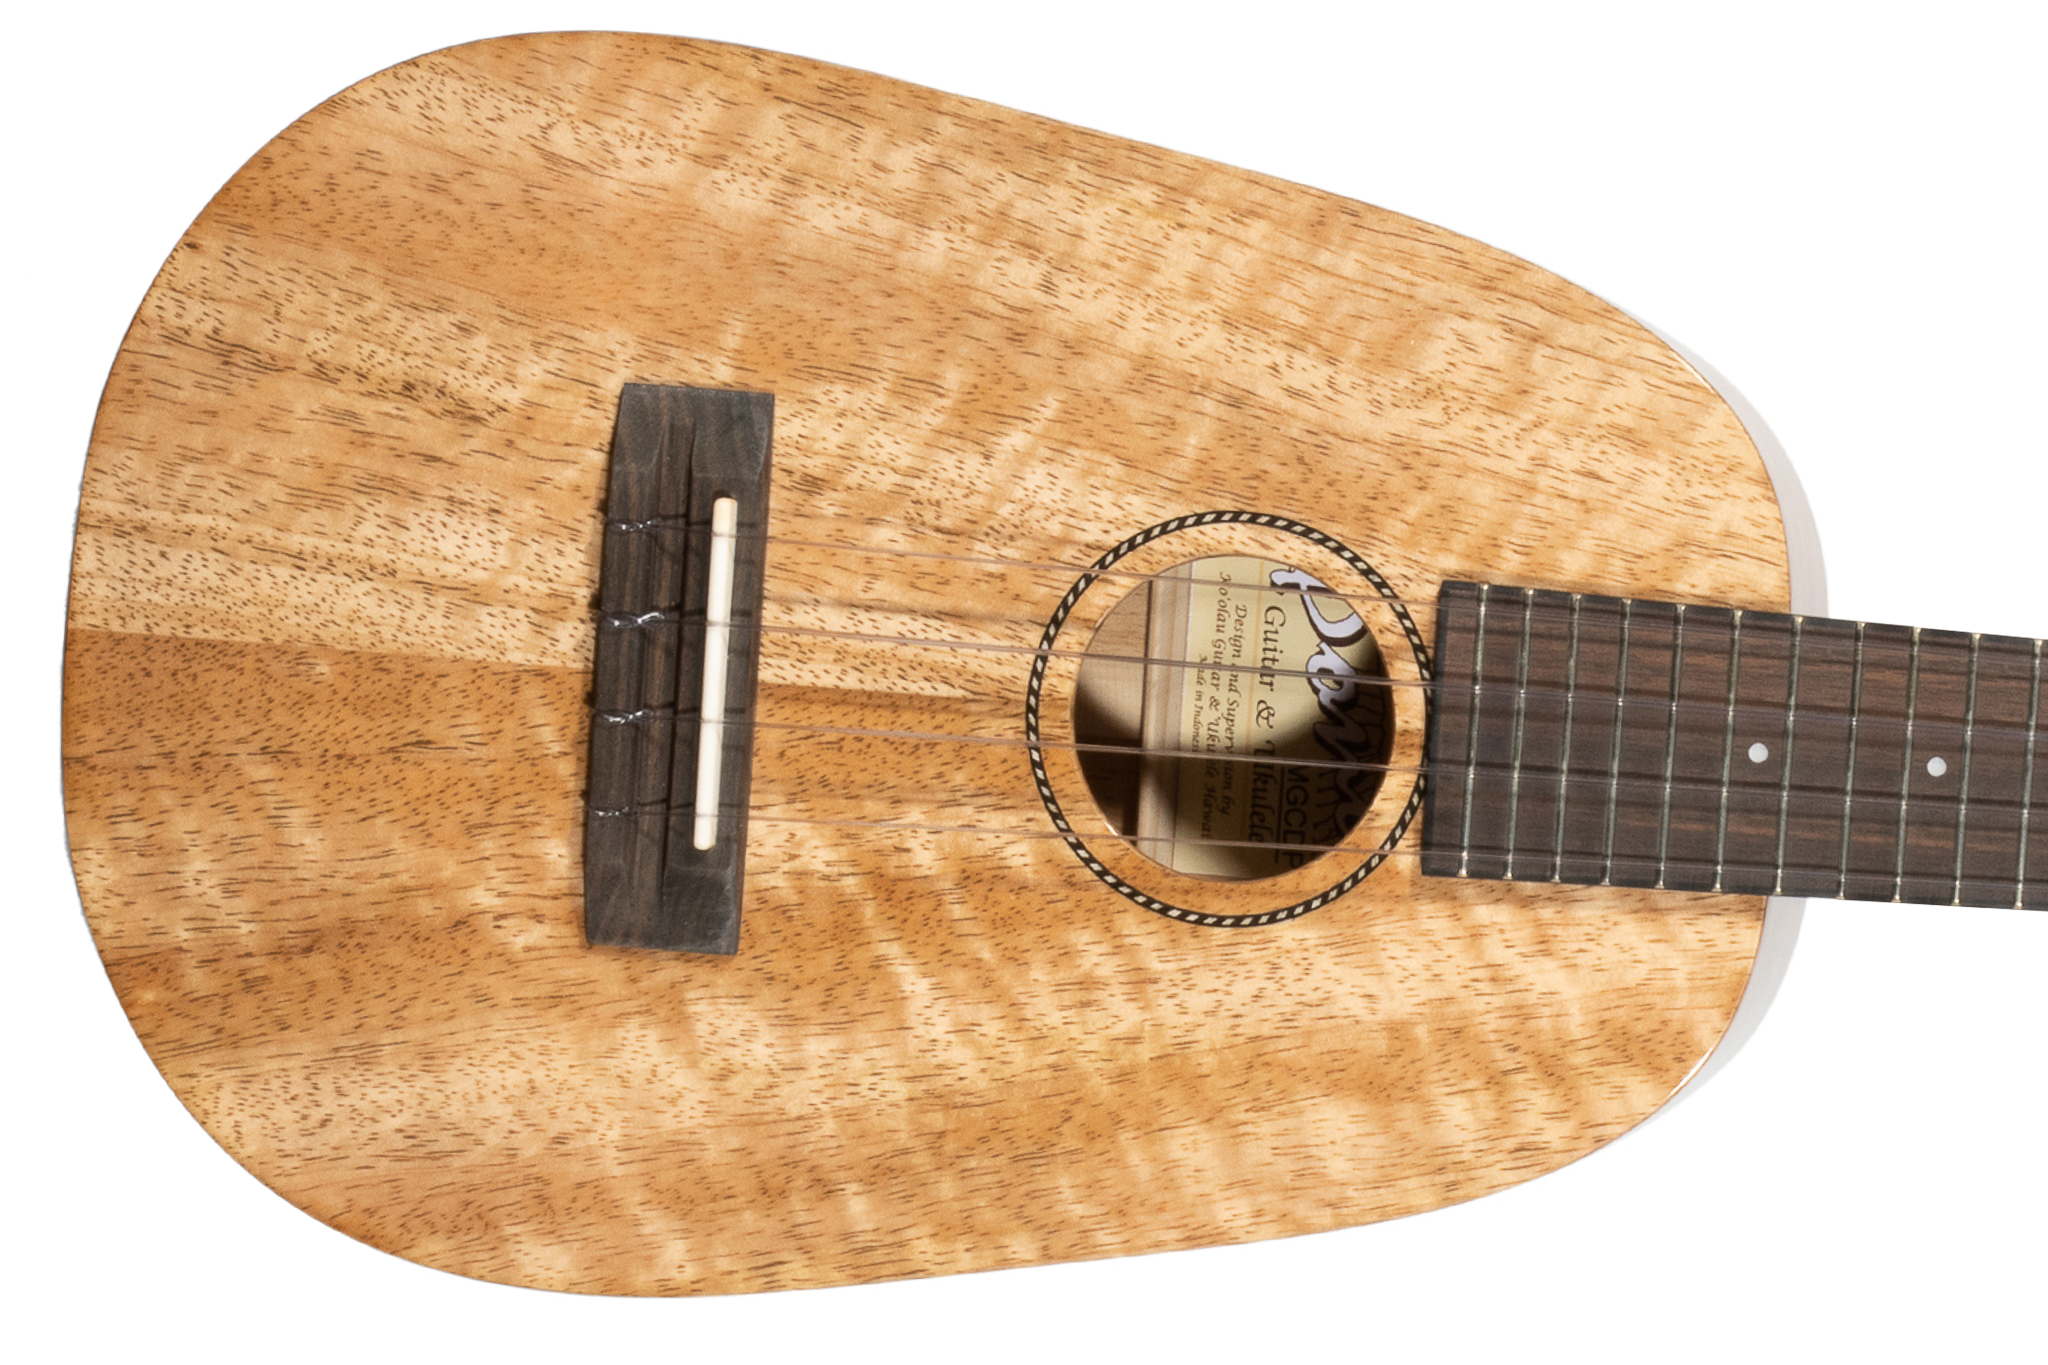 Pono MGCDP Deluxe Pineapple Concert Ukulele All Solid Mango "Olly"